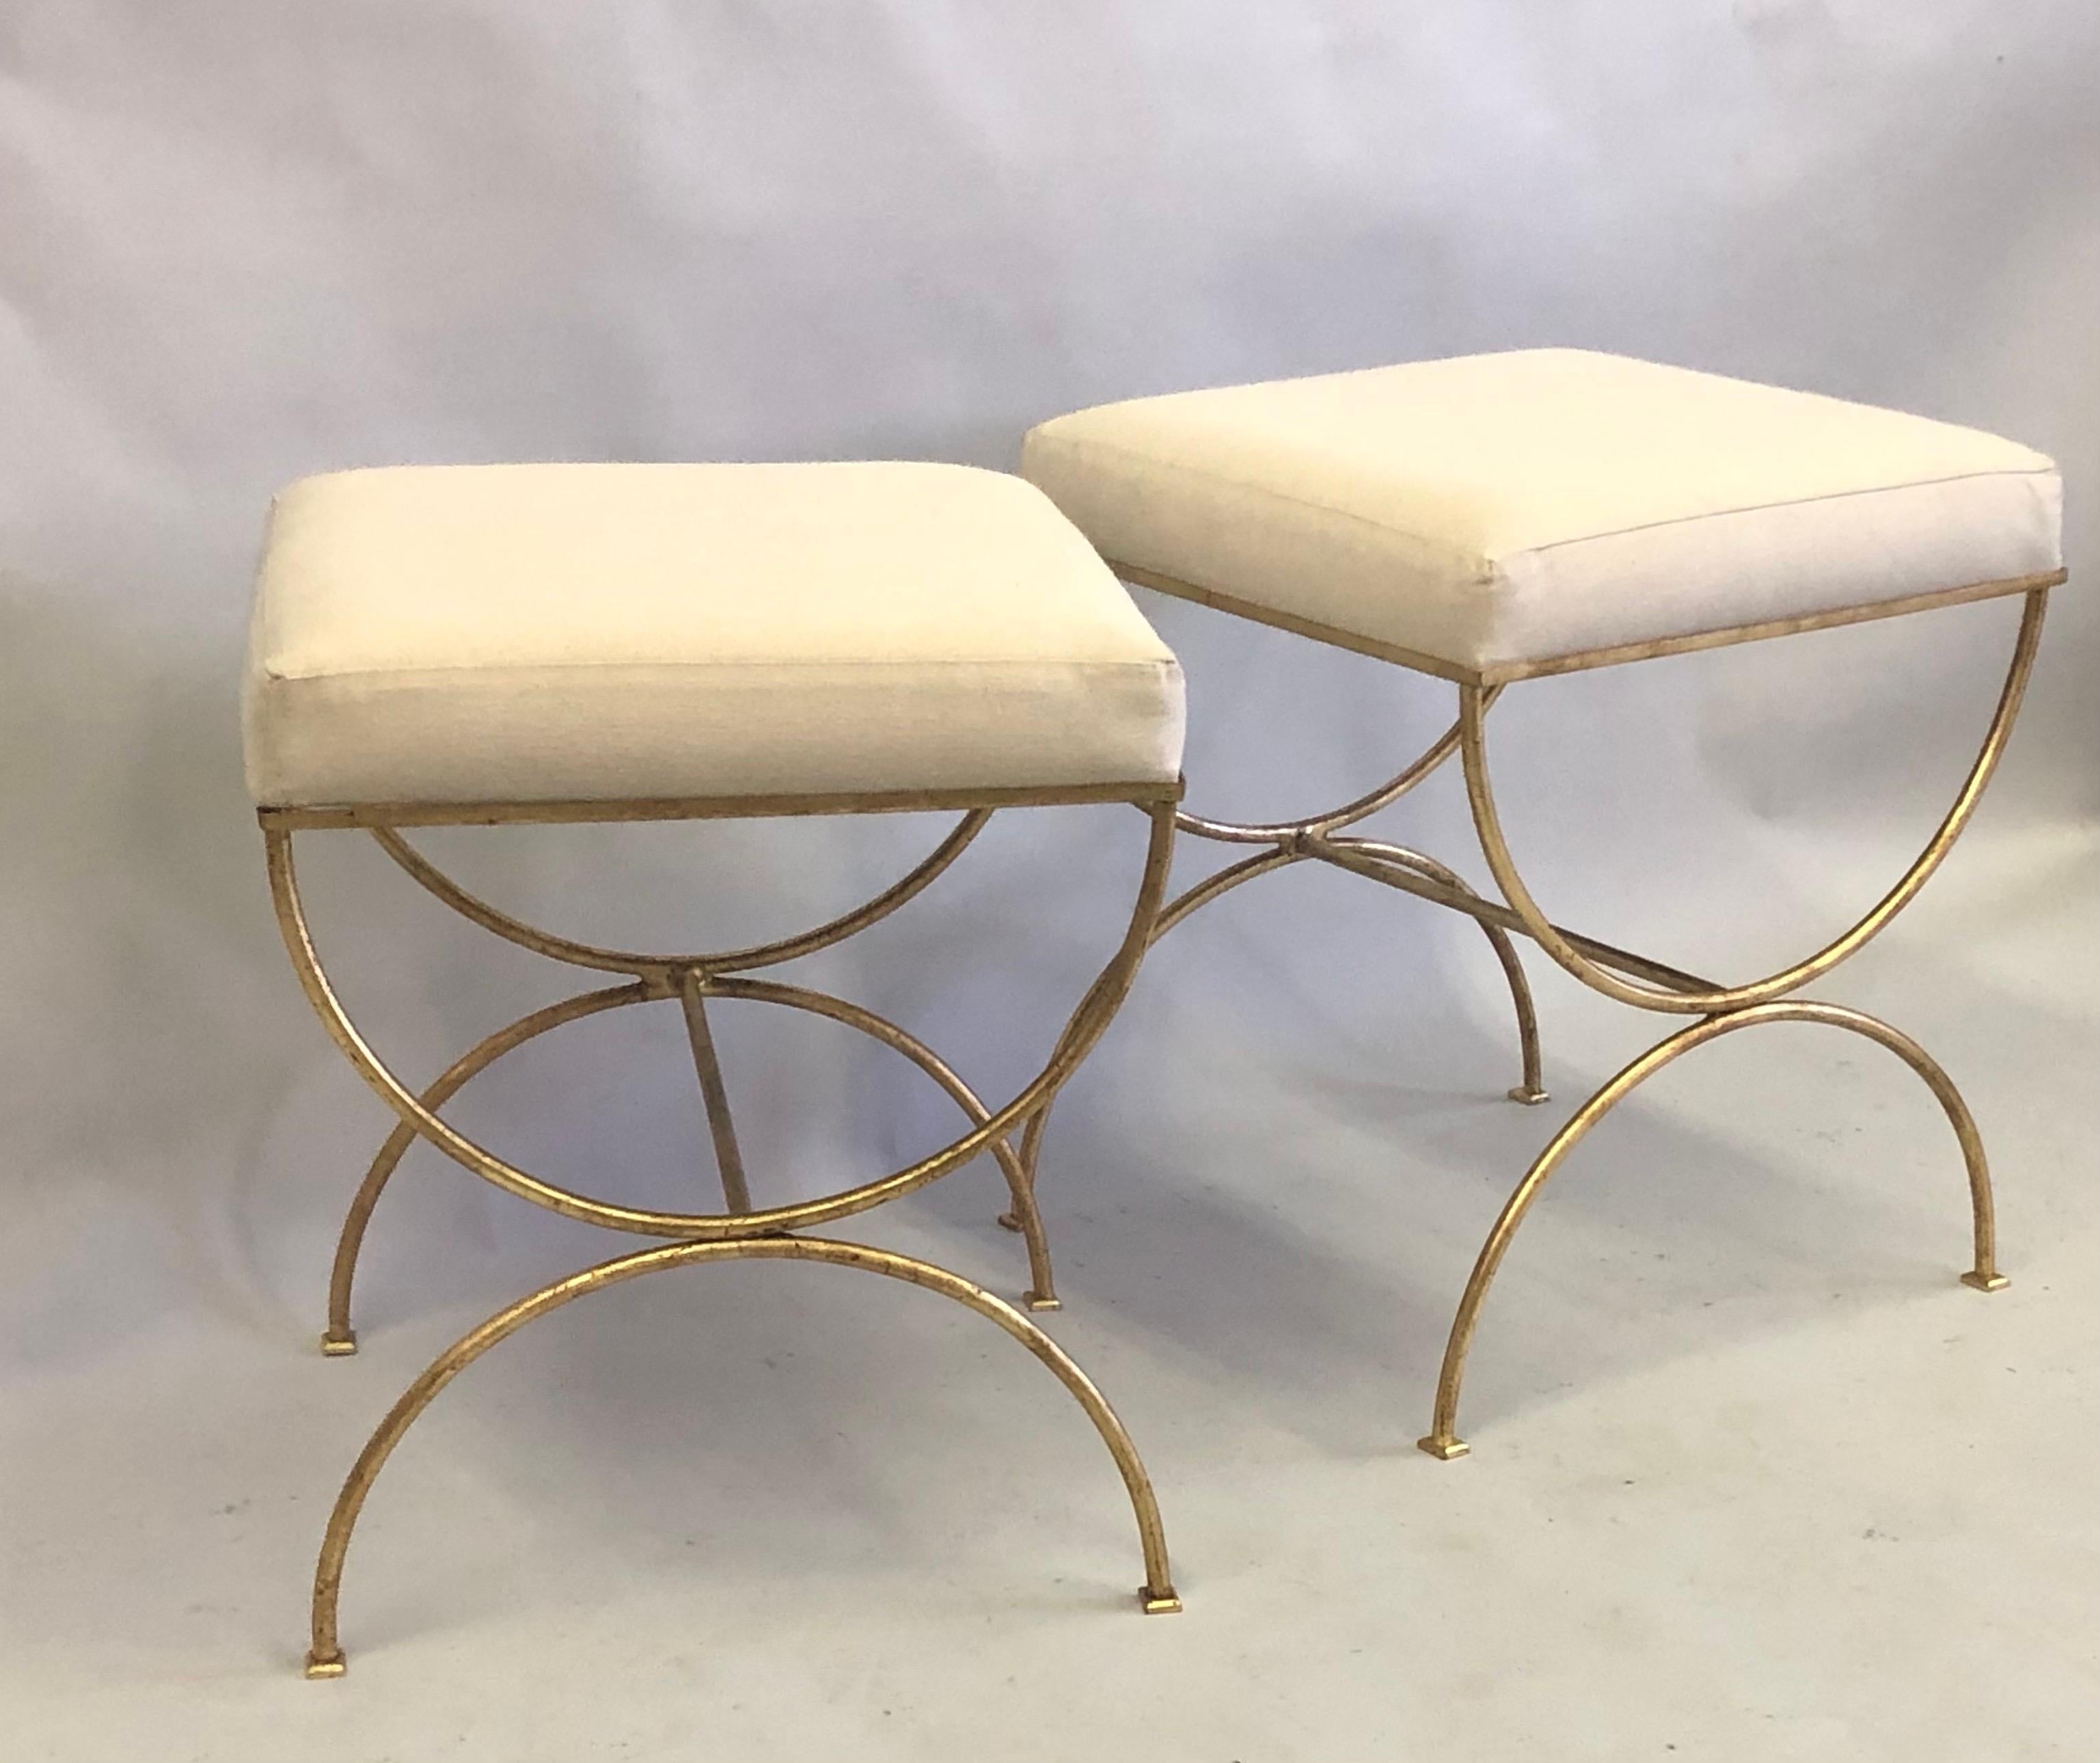 Elegant Pair of French Mid-Century Modern neoclassical benches / stools in the style of Jean Michel Frank. The pieces are in a classic curile form in gilt wrought iron with the seats covered in a heavy cotton.
Measures: H 21 x 18 x 18.